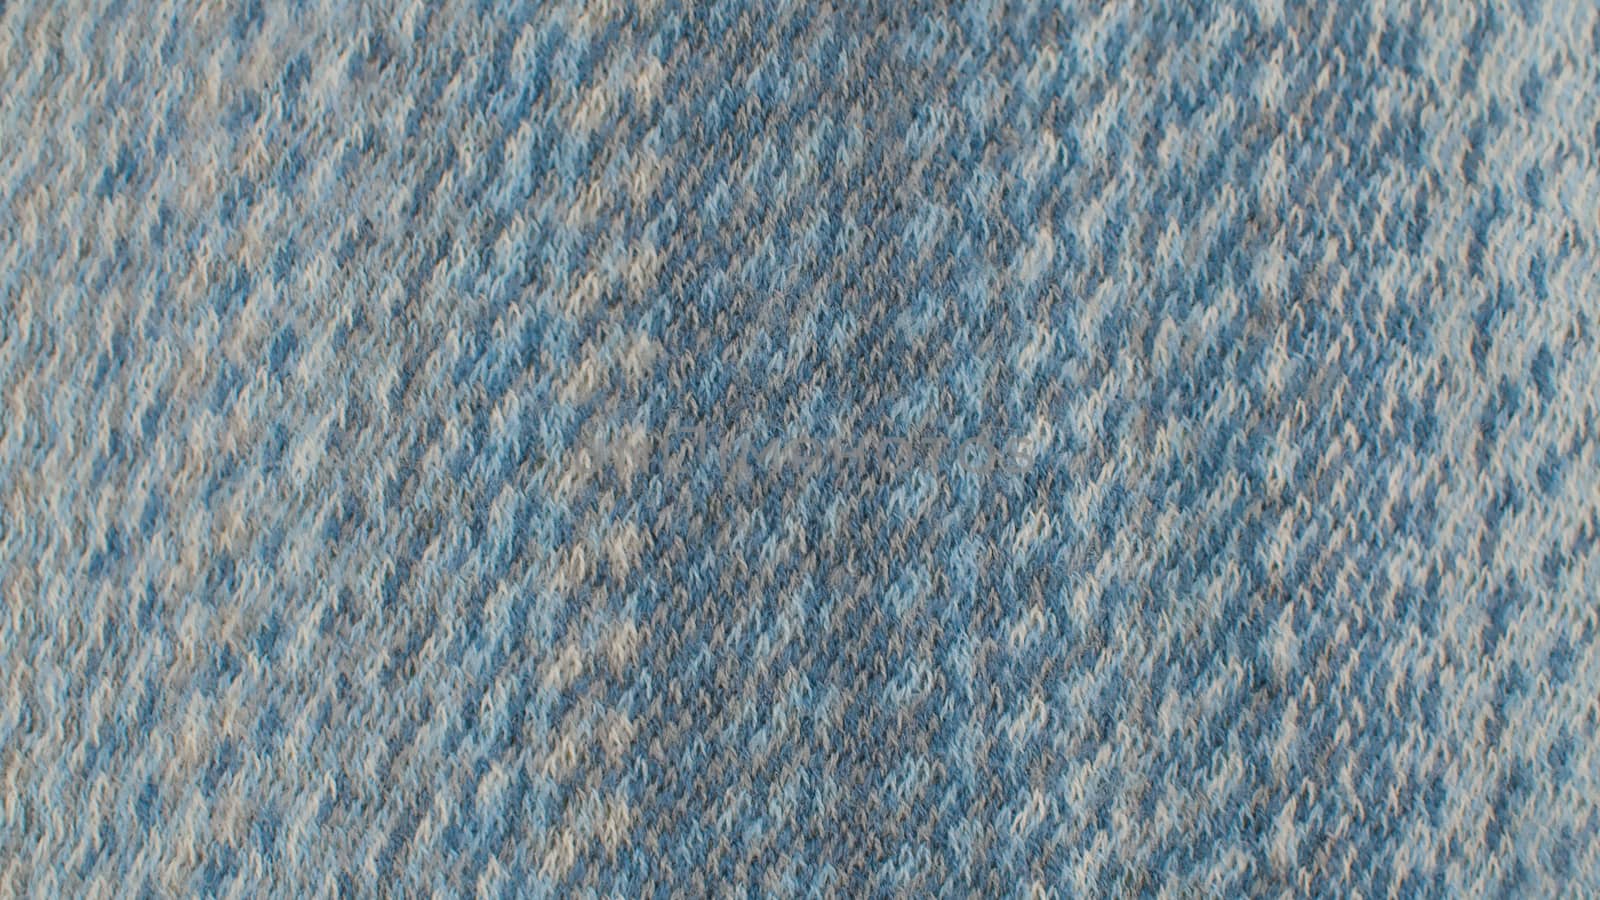 Extreme close up blue woolen fabric in woven pattern. Texture, textile background. Macro shooting